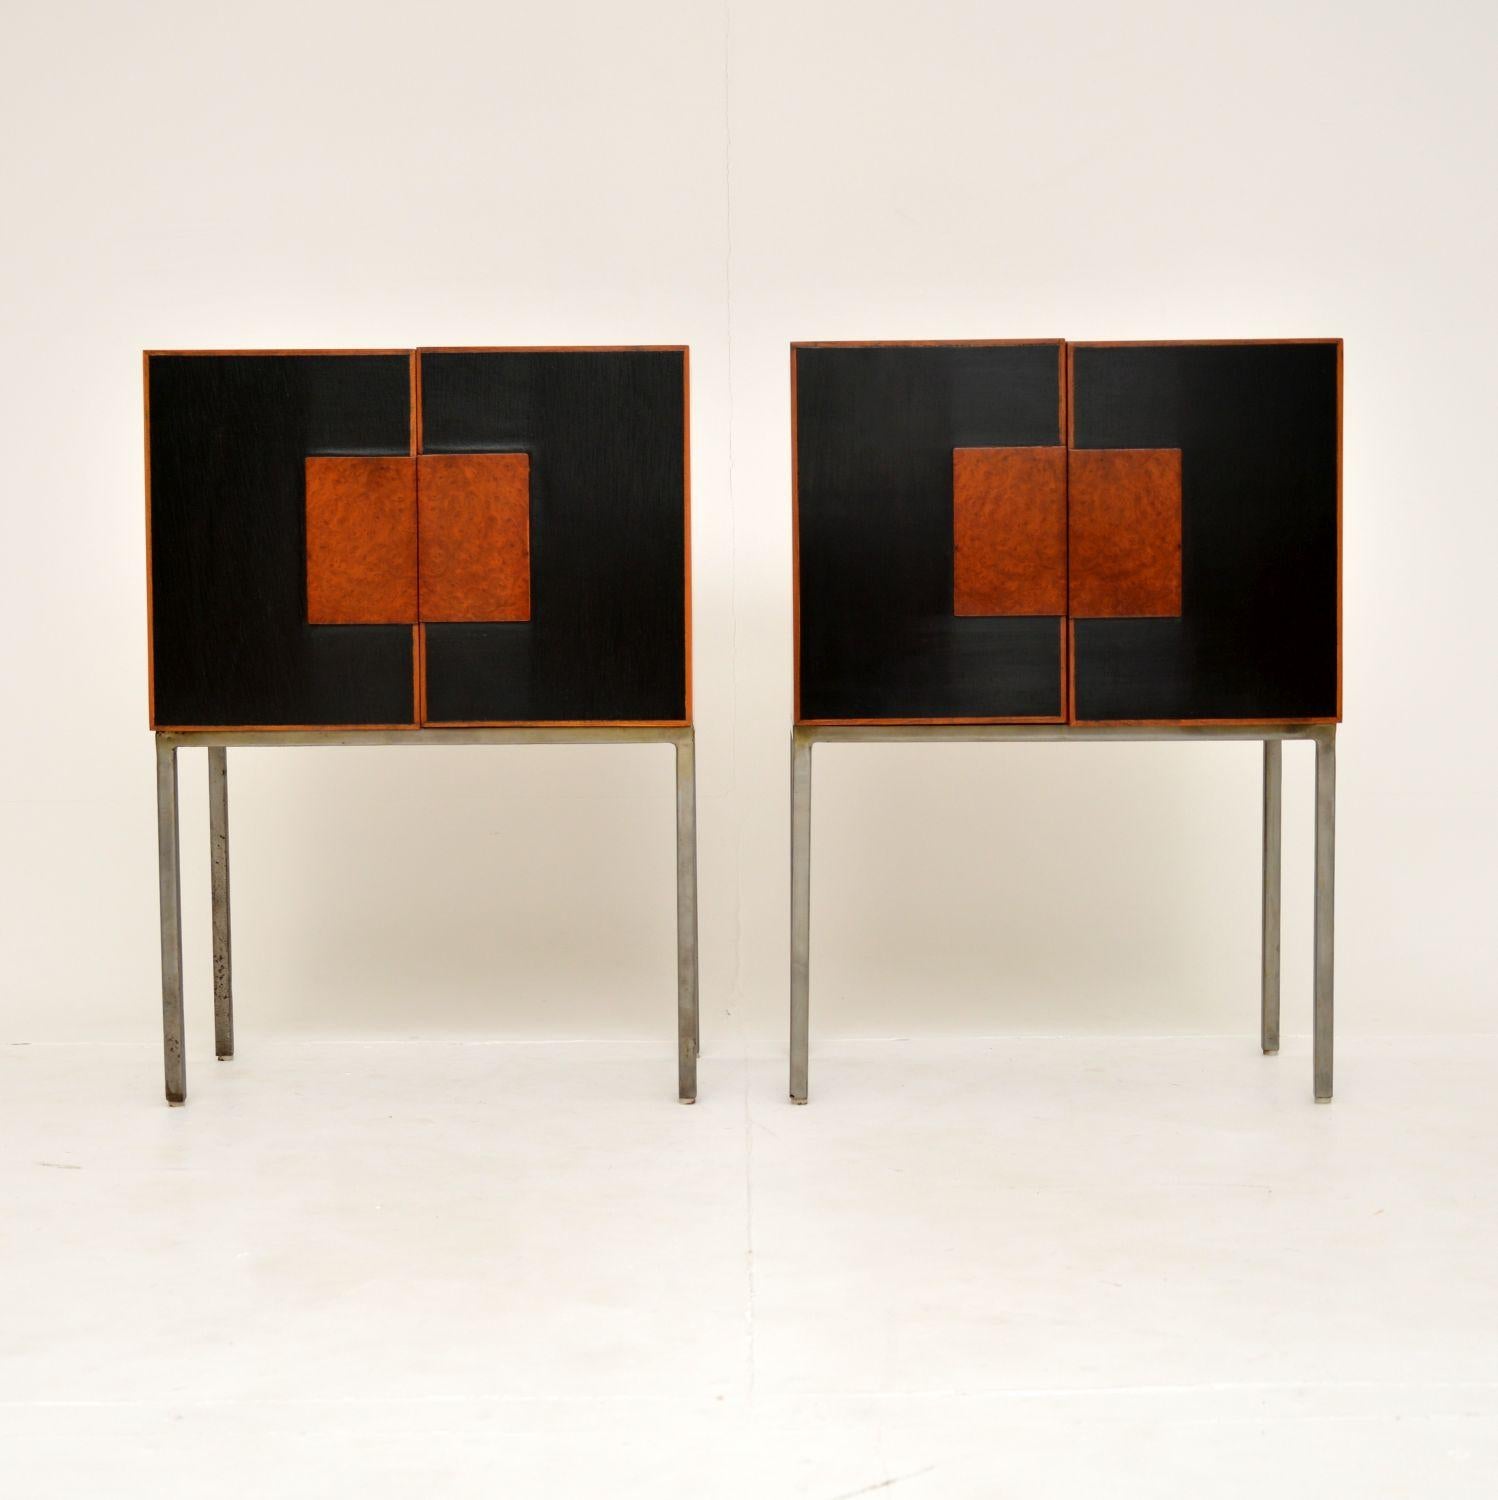 A very stylish and well made pair of vintage Italian side cabinets. They were made in Italy and date from around the 1970-80’s.

They are beautifully designed and are of superb quality. The carcasses are birch, with ebonised doors, burr walnut